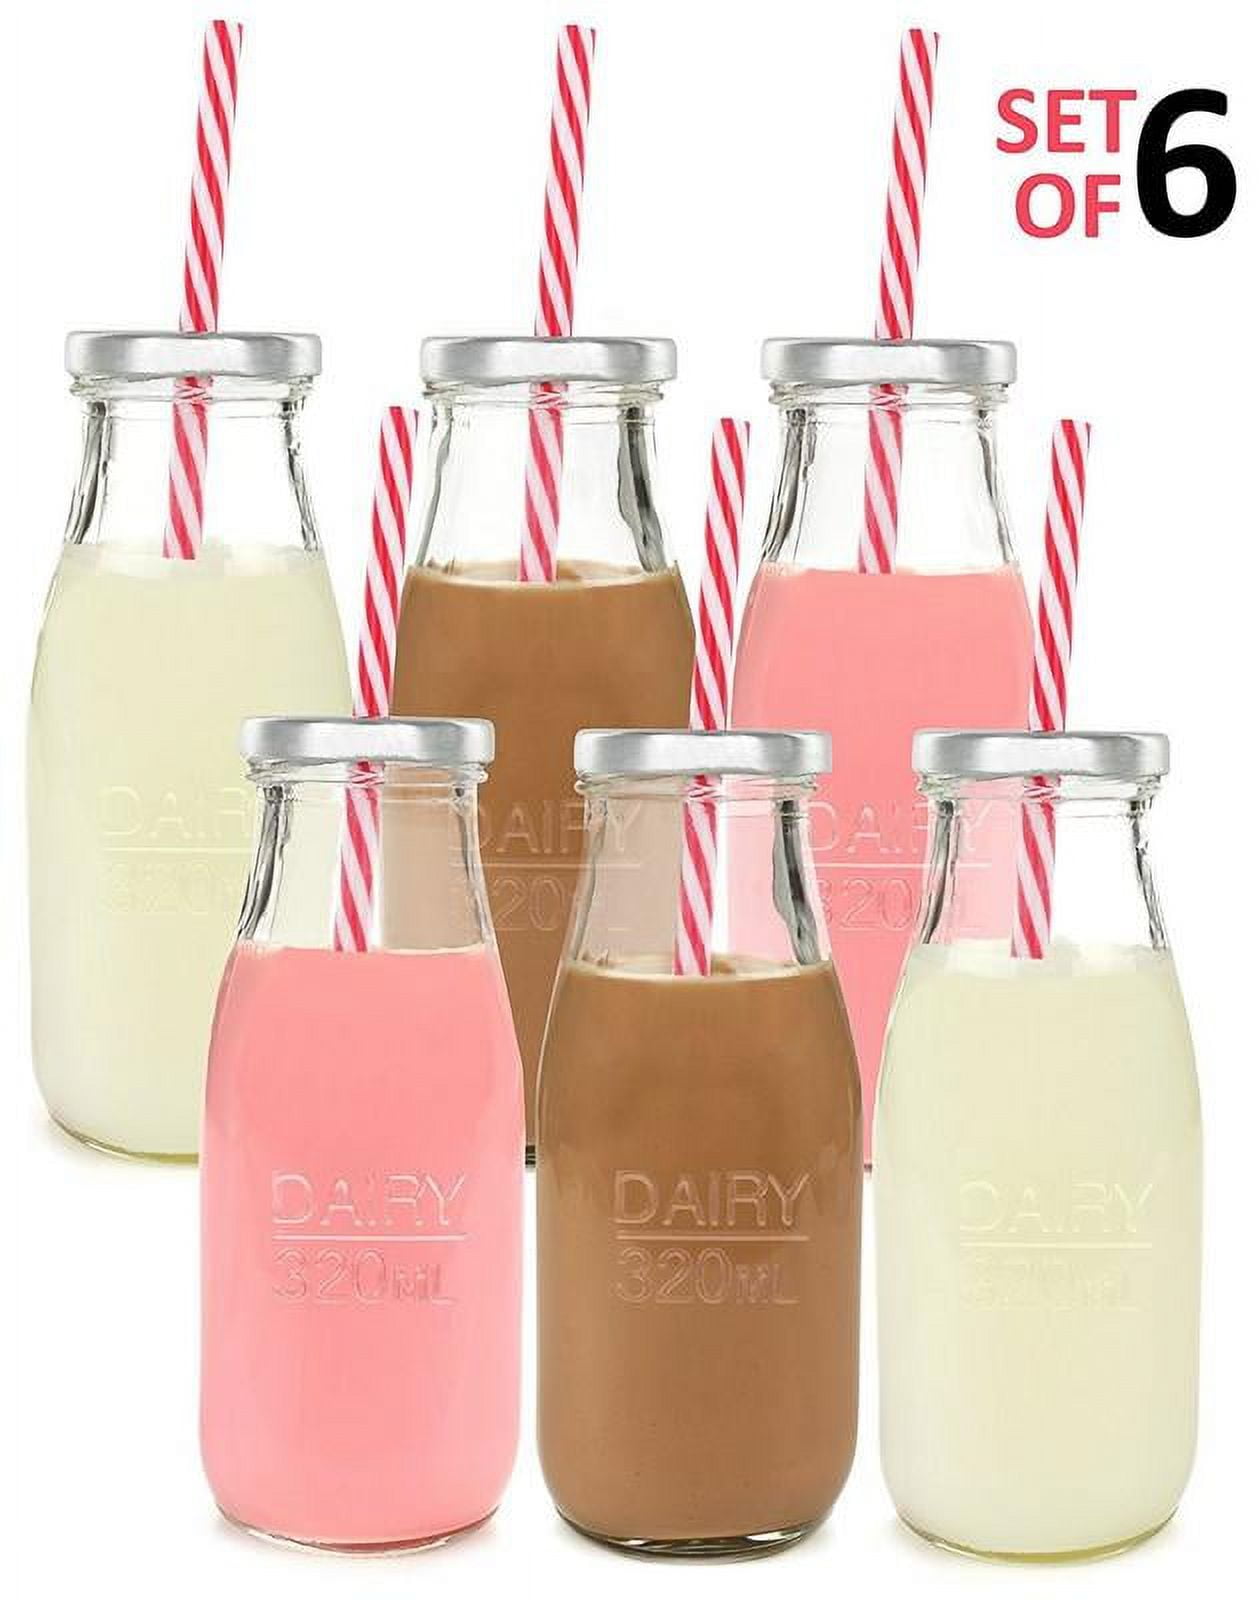  Estilo Glass Milk Bottle with Lid - Milk Glass - Reusable Glass  Bottle for Dairy Milk With Straws & Metal Screw On Lids, 10.5 Ounce, Clear,  Set of 6: Home & Kitchen